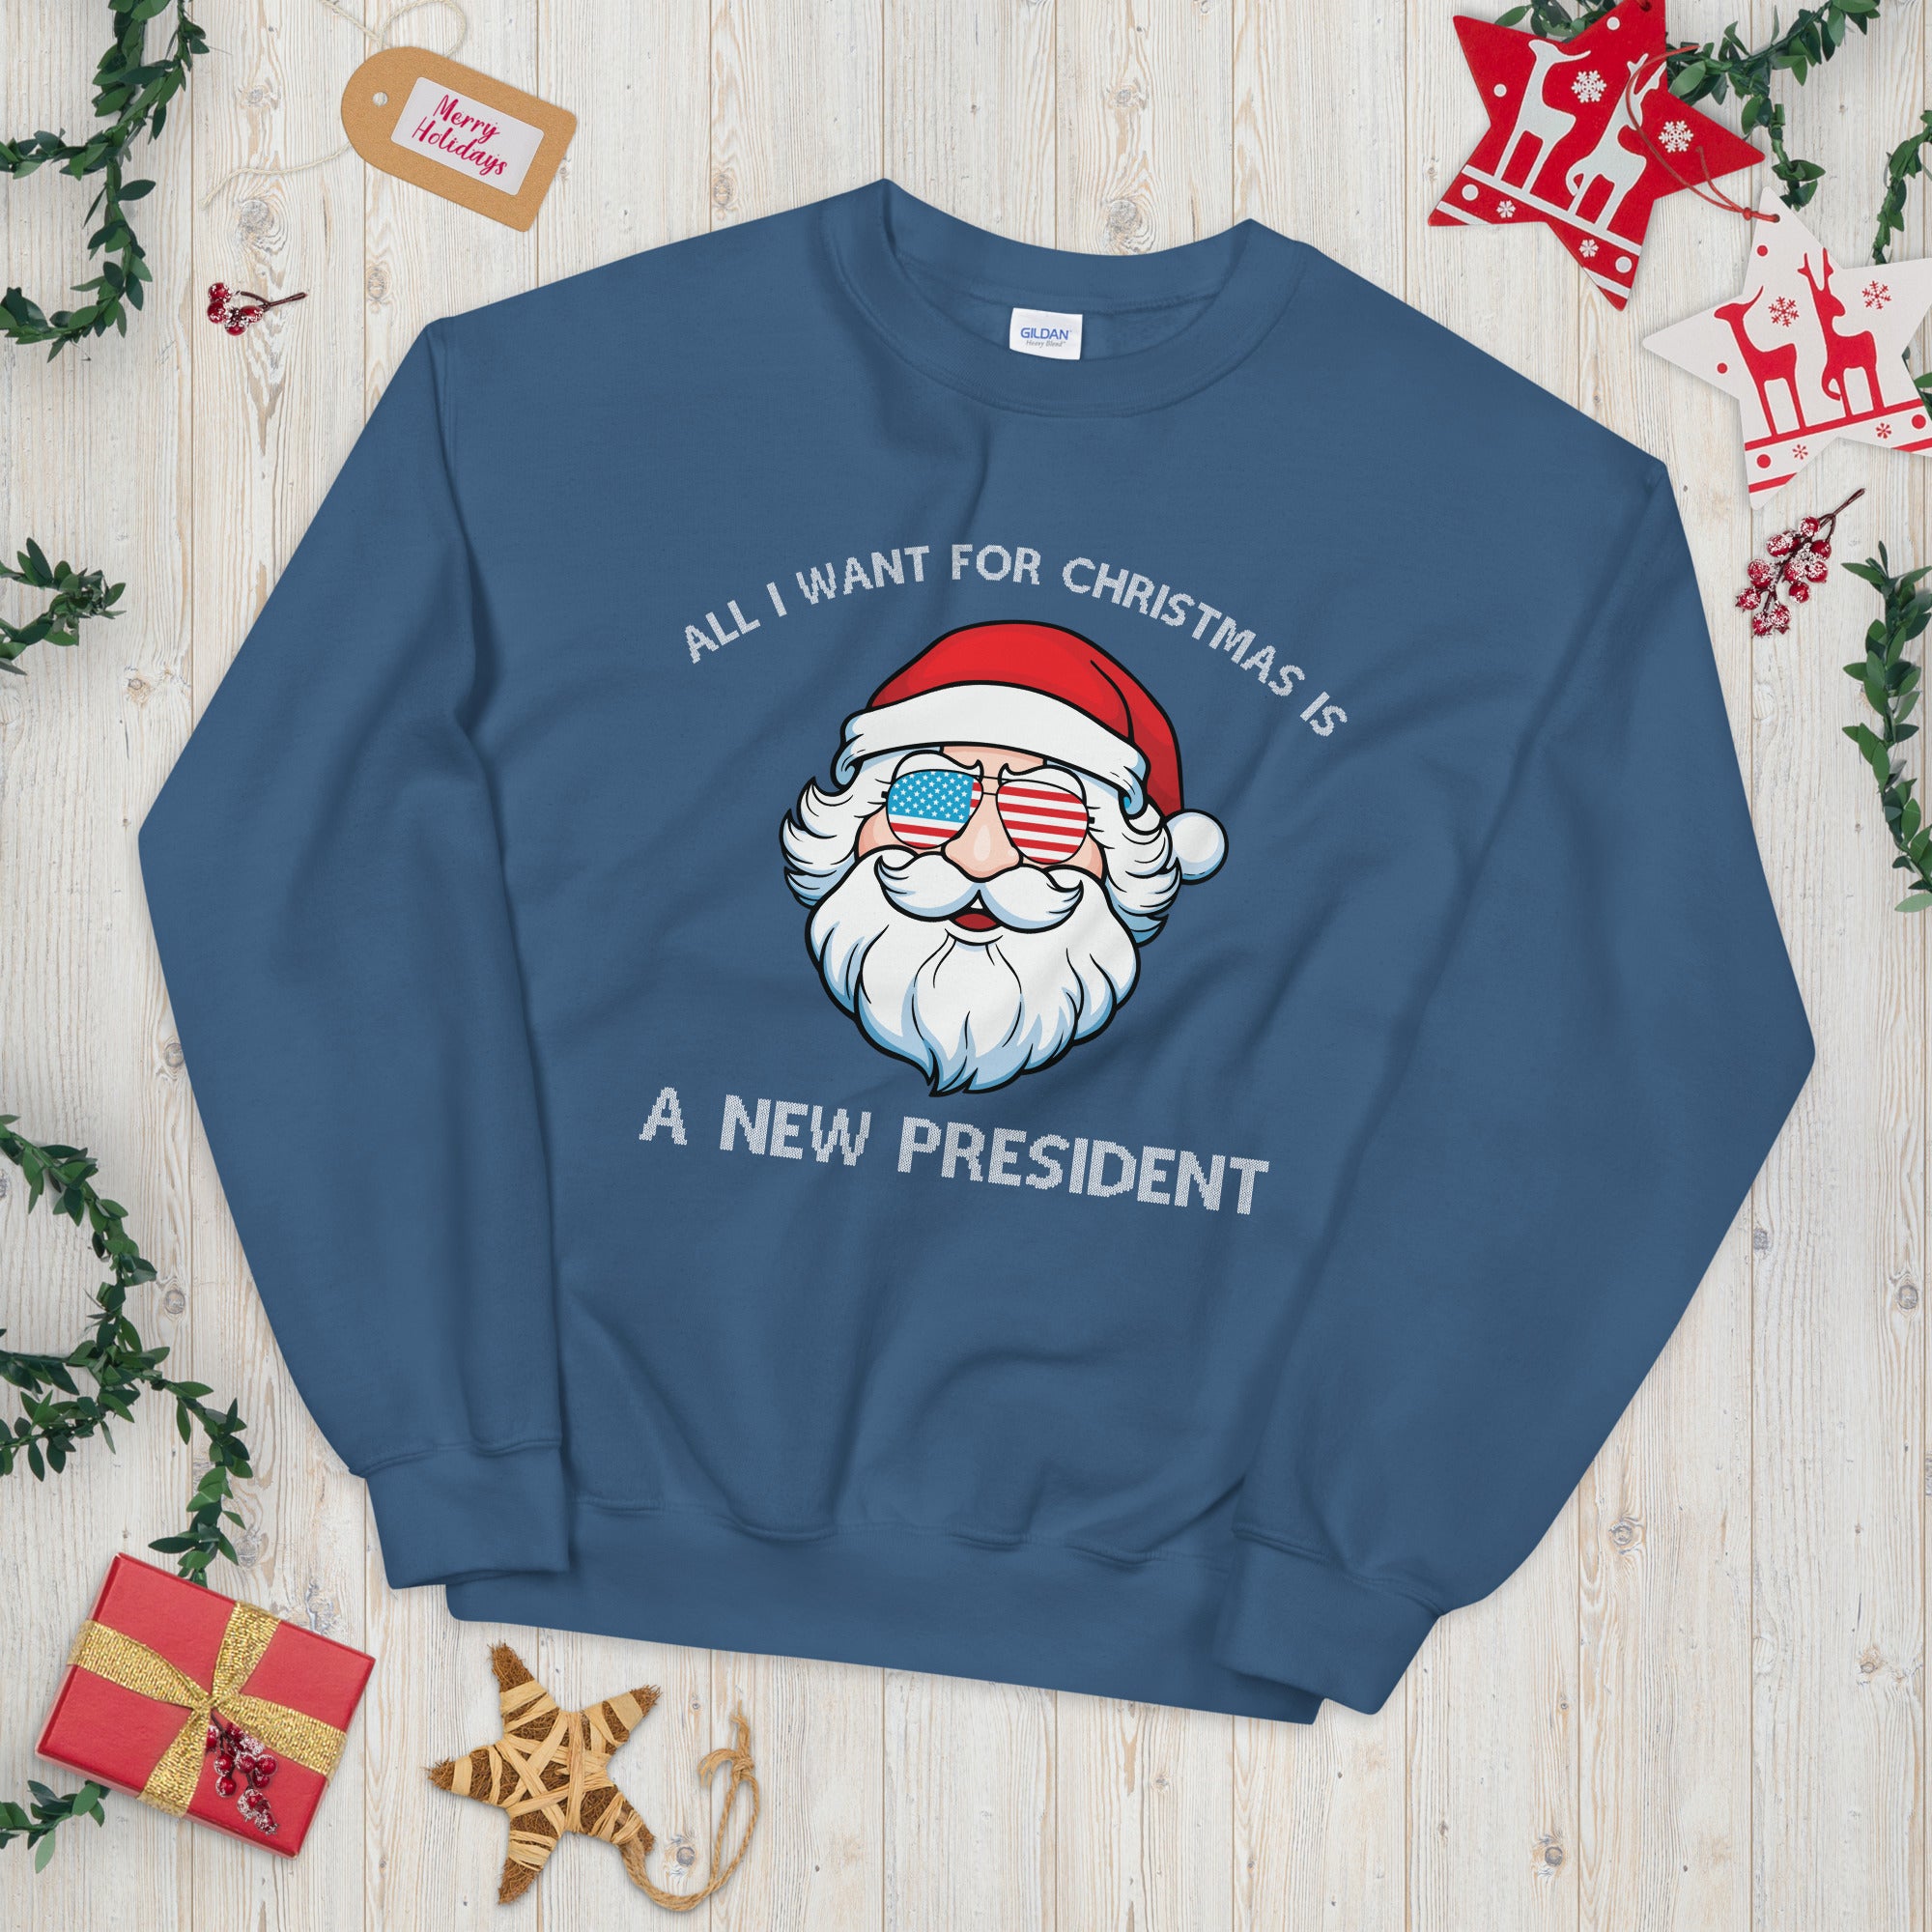 All I Want For Christmas Is A New President, Republican Christmas Sweater, Funny Biden Christmas Sweatshirt, Patriot Shirt, Xmas Gifts - Madeinsea©